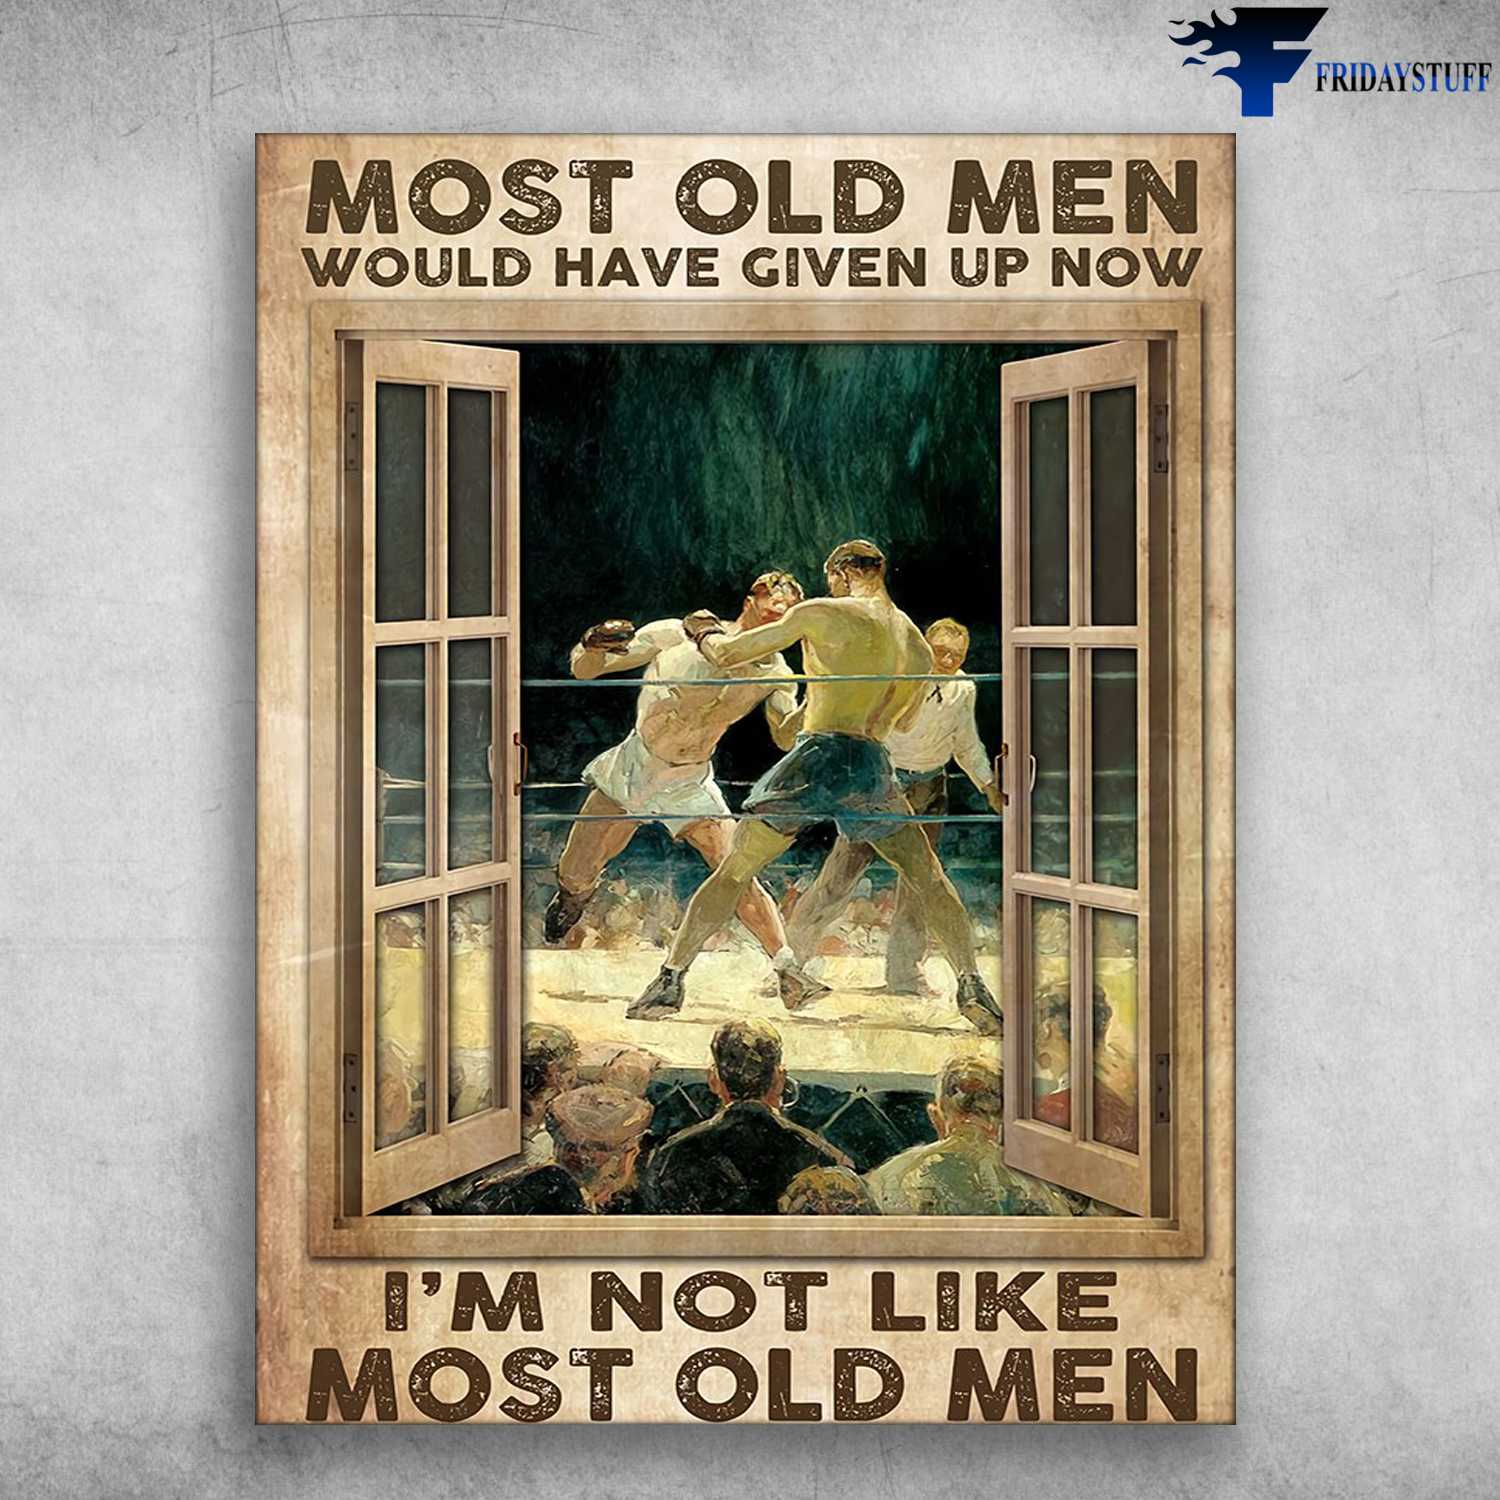 Boxing Poster, Boxing Old Man - Most Old Men, Would Have Given Up Now, I'm Not Like Most Old Men